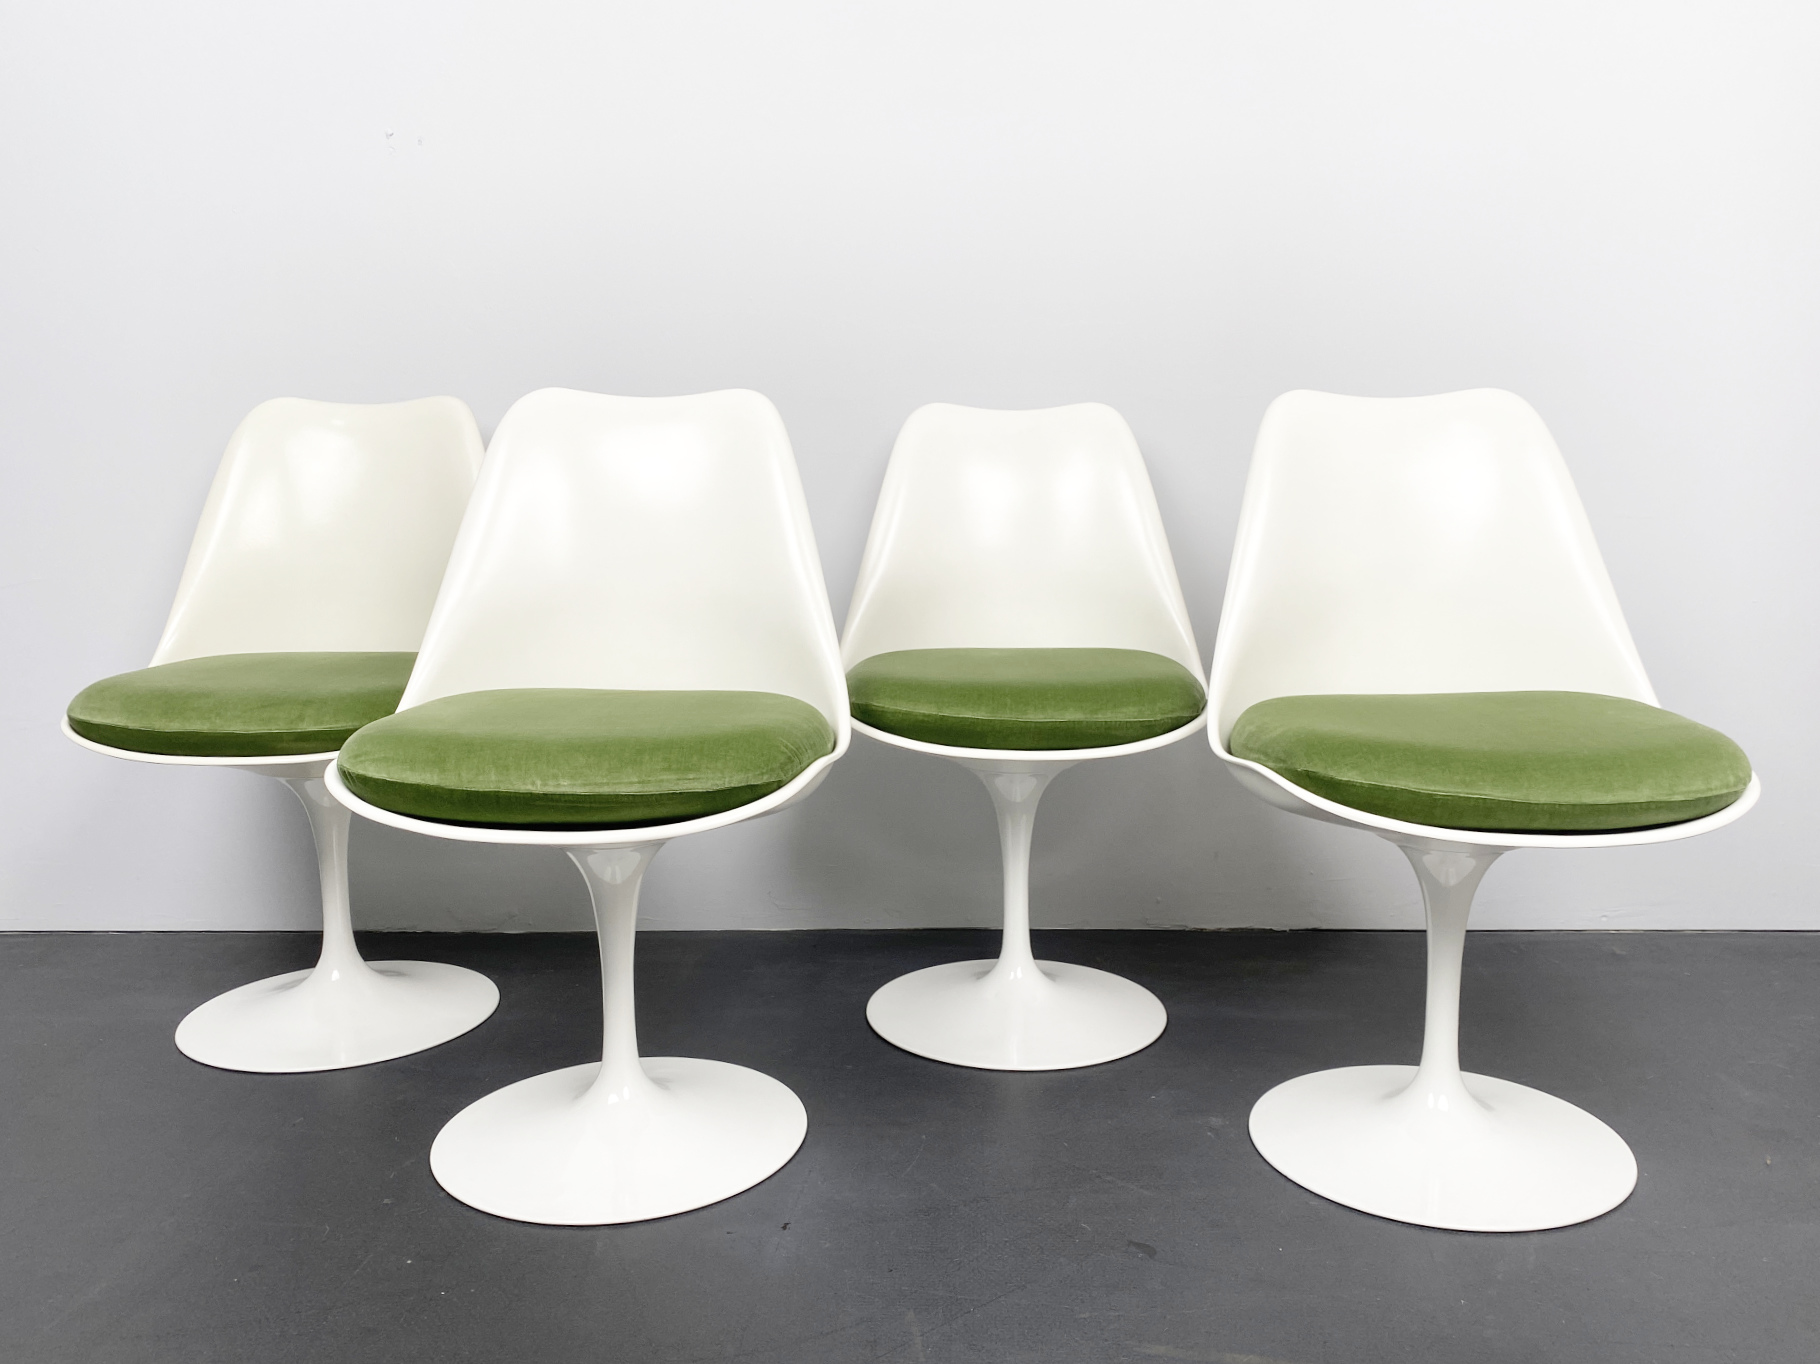 Set of 4 Tulip Chairs by Eero Saarinen for Knoll International, United States, 1960s